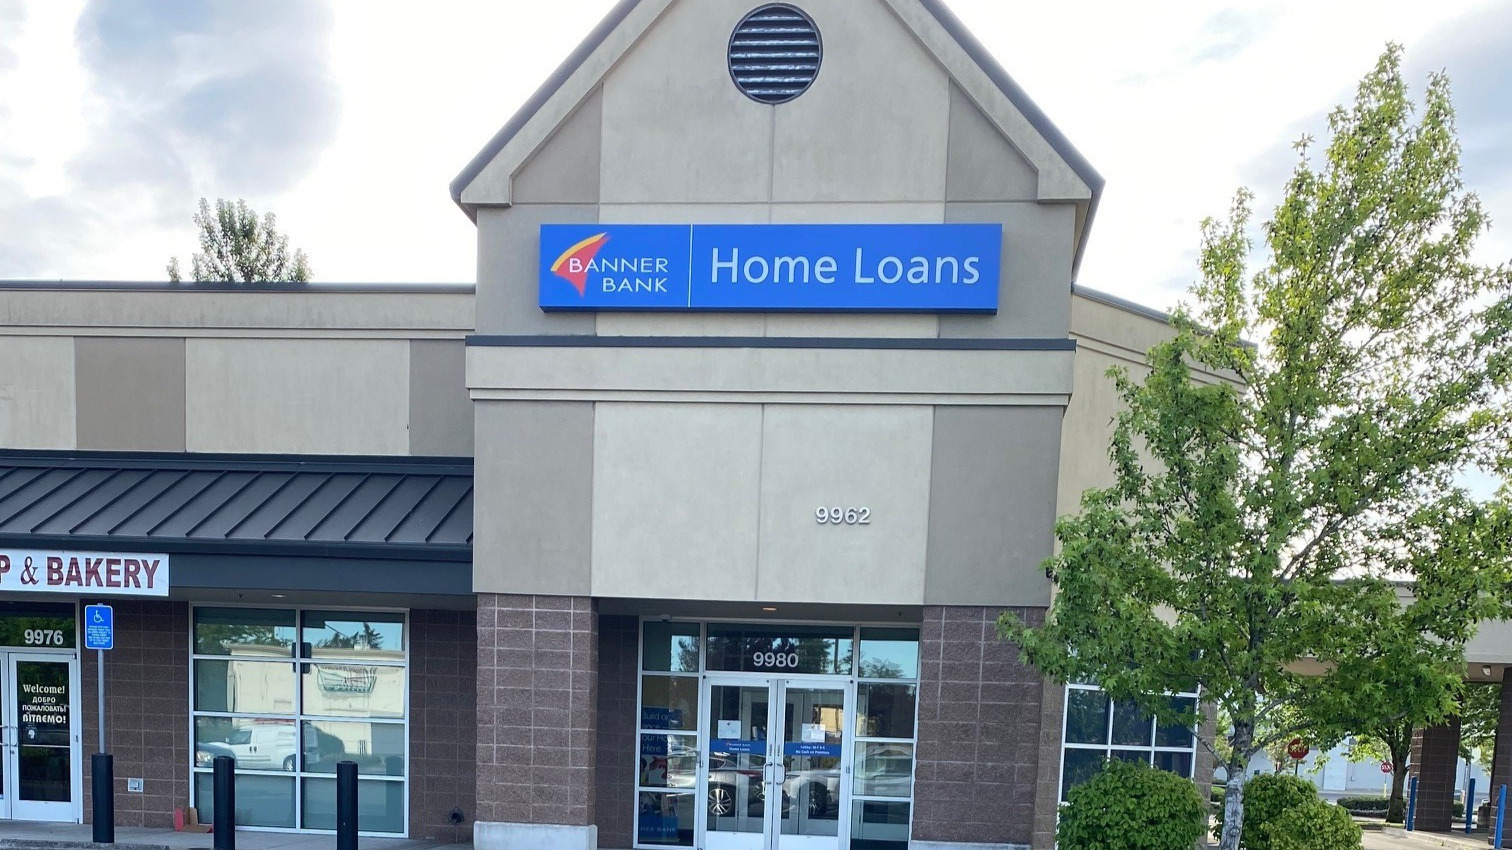 Banner Bank Home Lending office in Happy Valley, Oregon